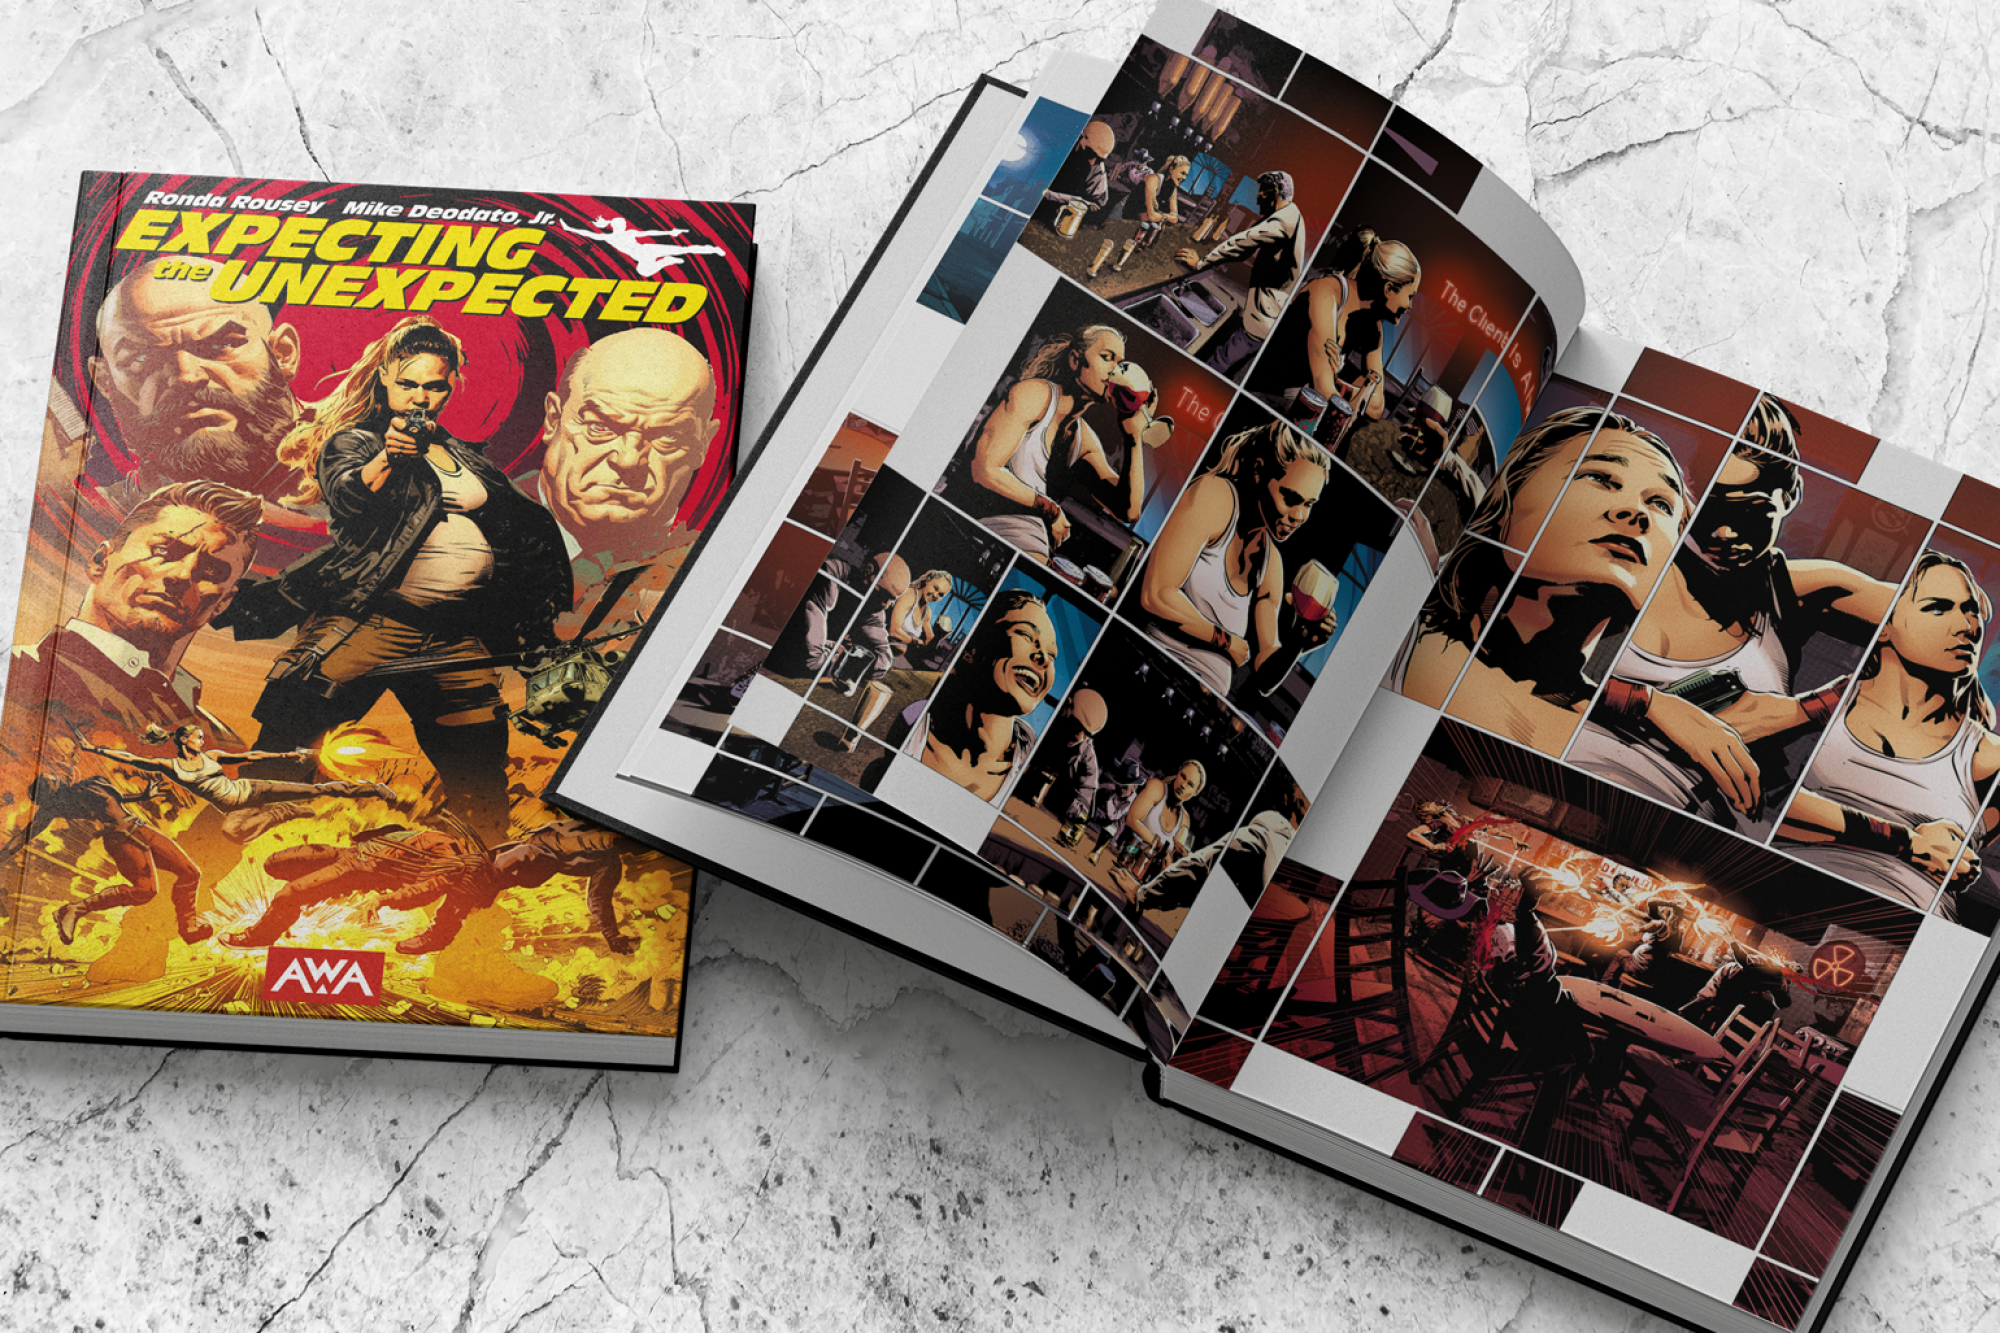 A mockup of the hardcover version of "Expecting the Unexpected," an upcoming graphic novel written by Ronda Rousey